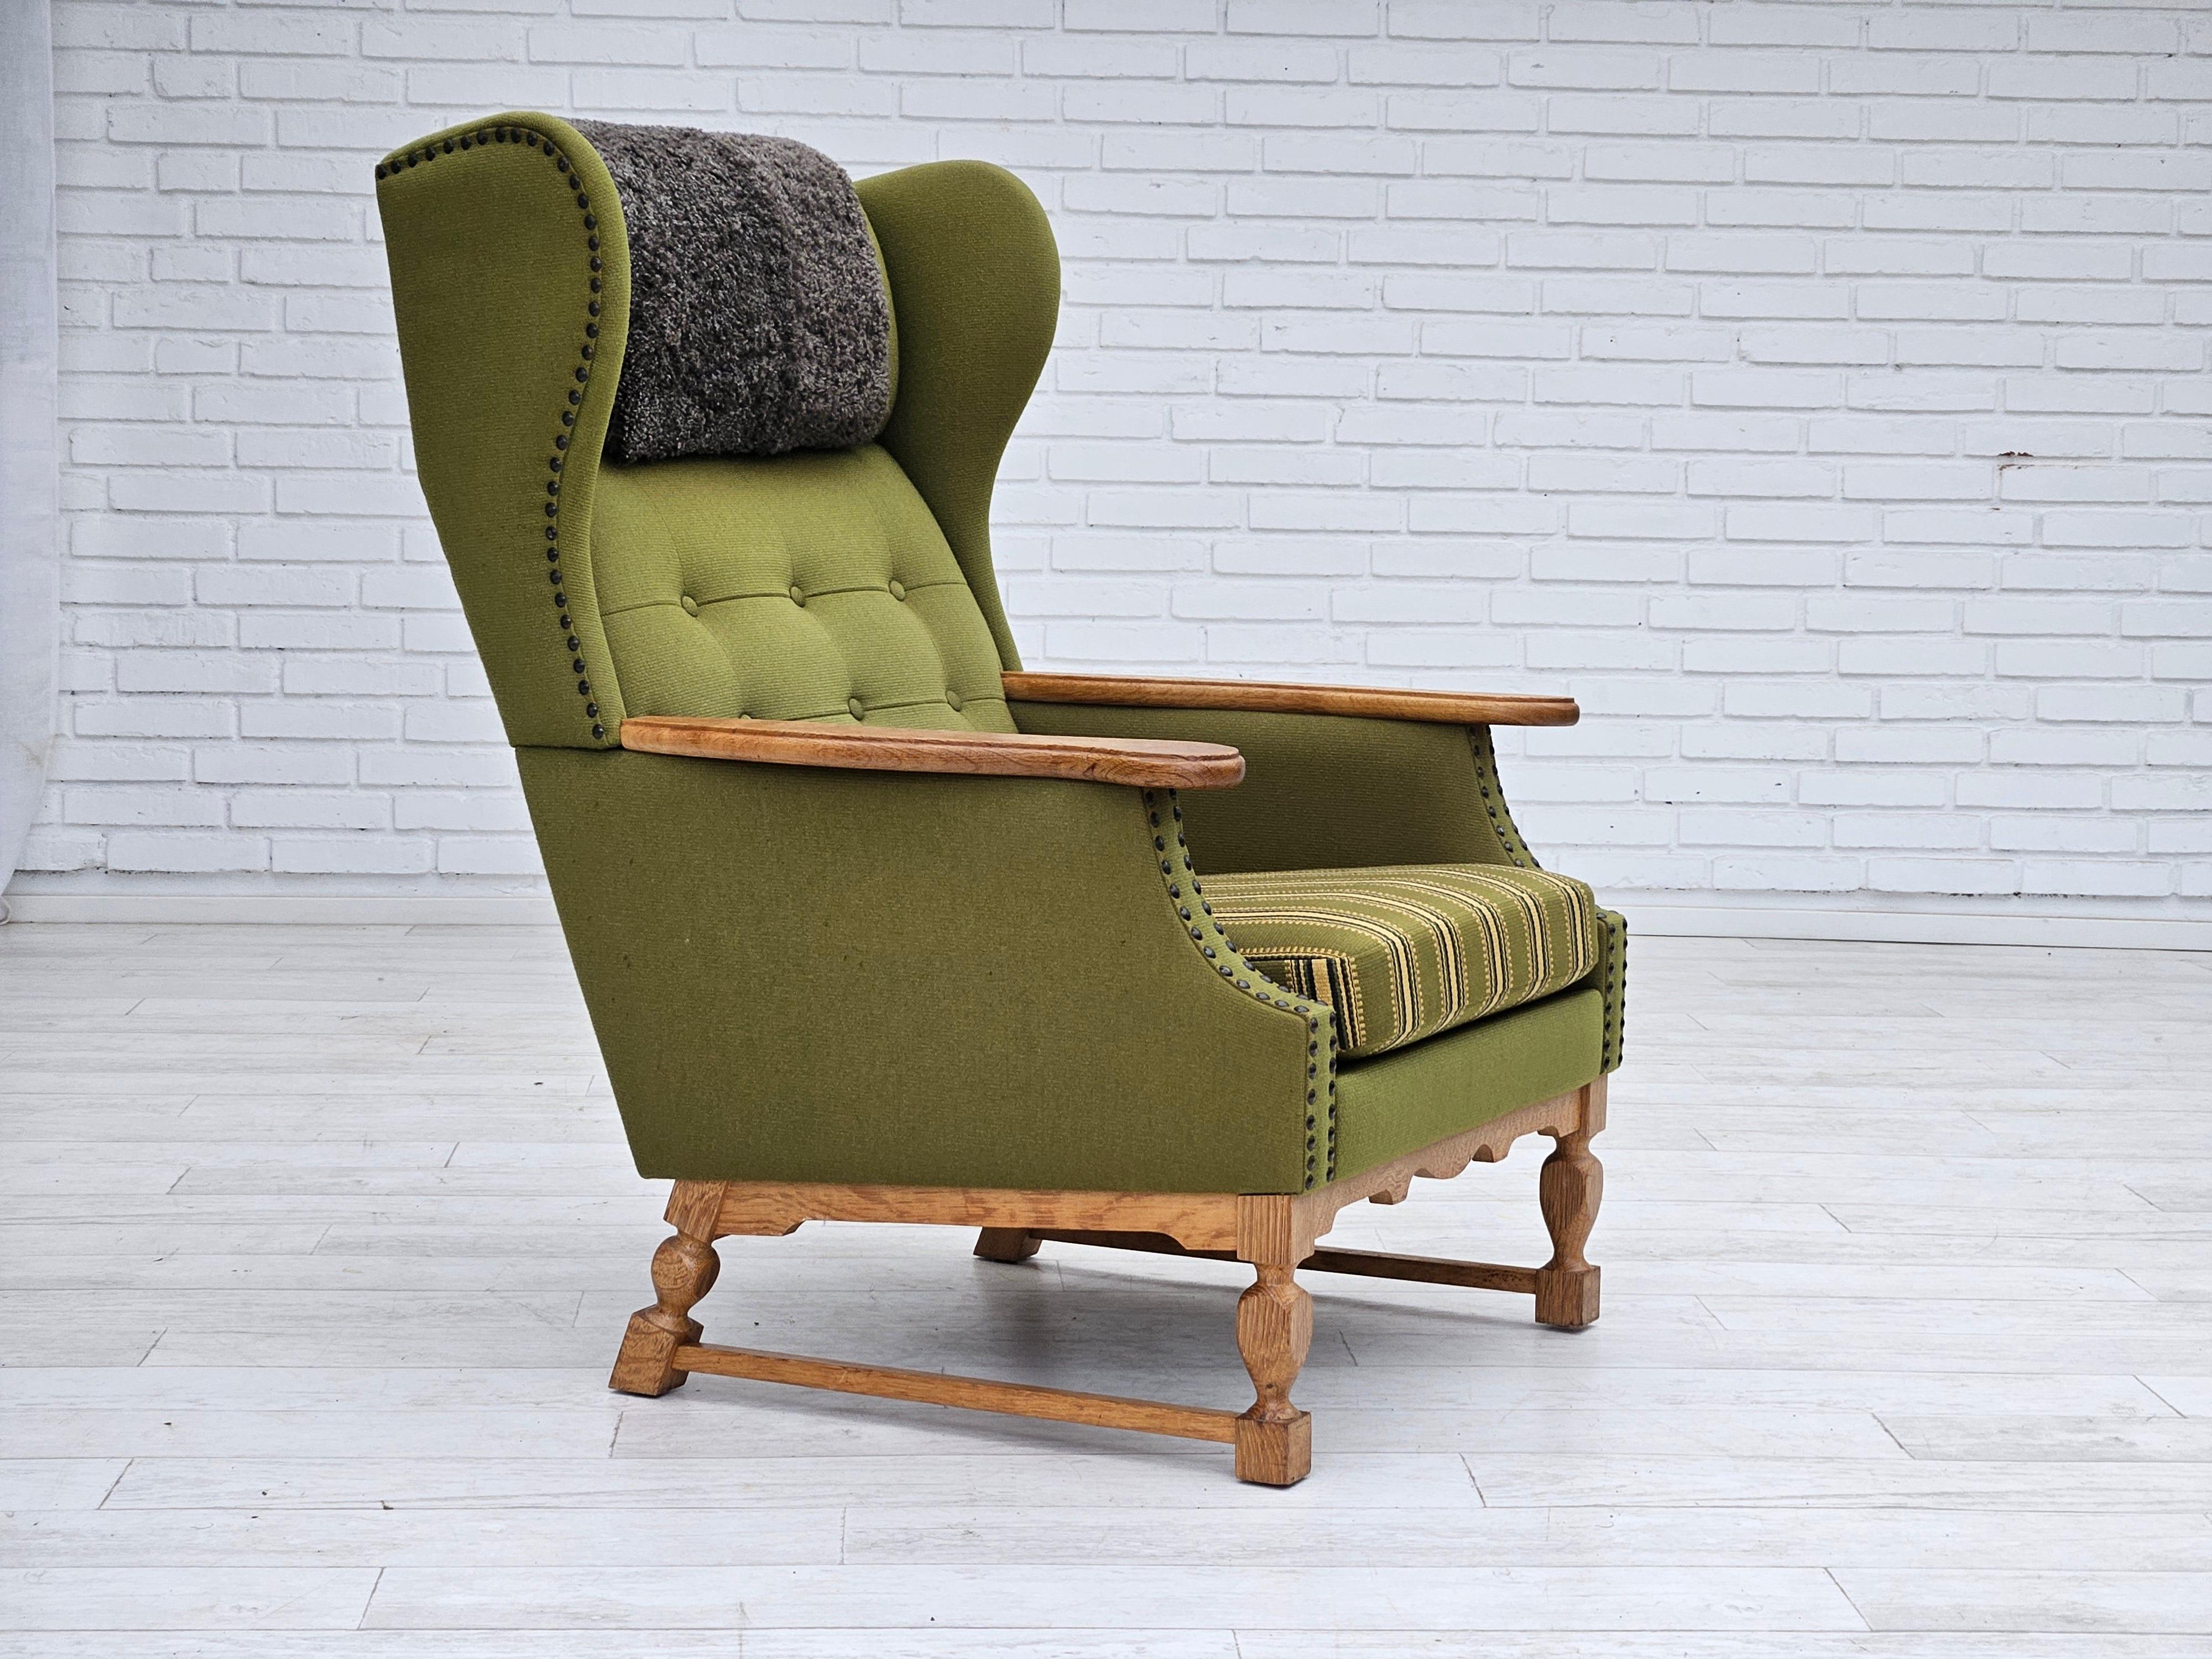 1970s, Danish highback armchair. Original very good condition: no smells and no stains. Olive green furniture wool, genuine sheepskin neck pillow. Oak wood, springs in the seat cushion. Manufactured by Danish furniture manufacturer in about 1970s.